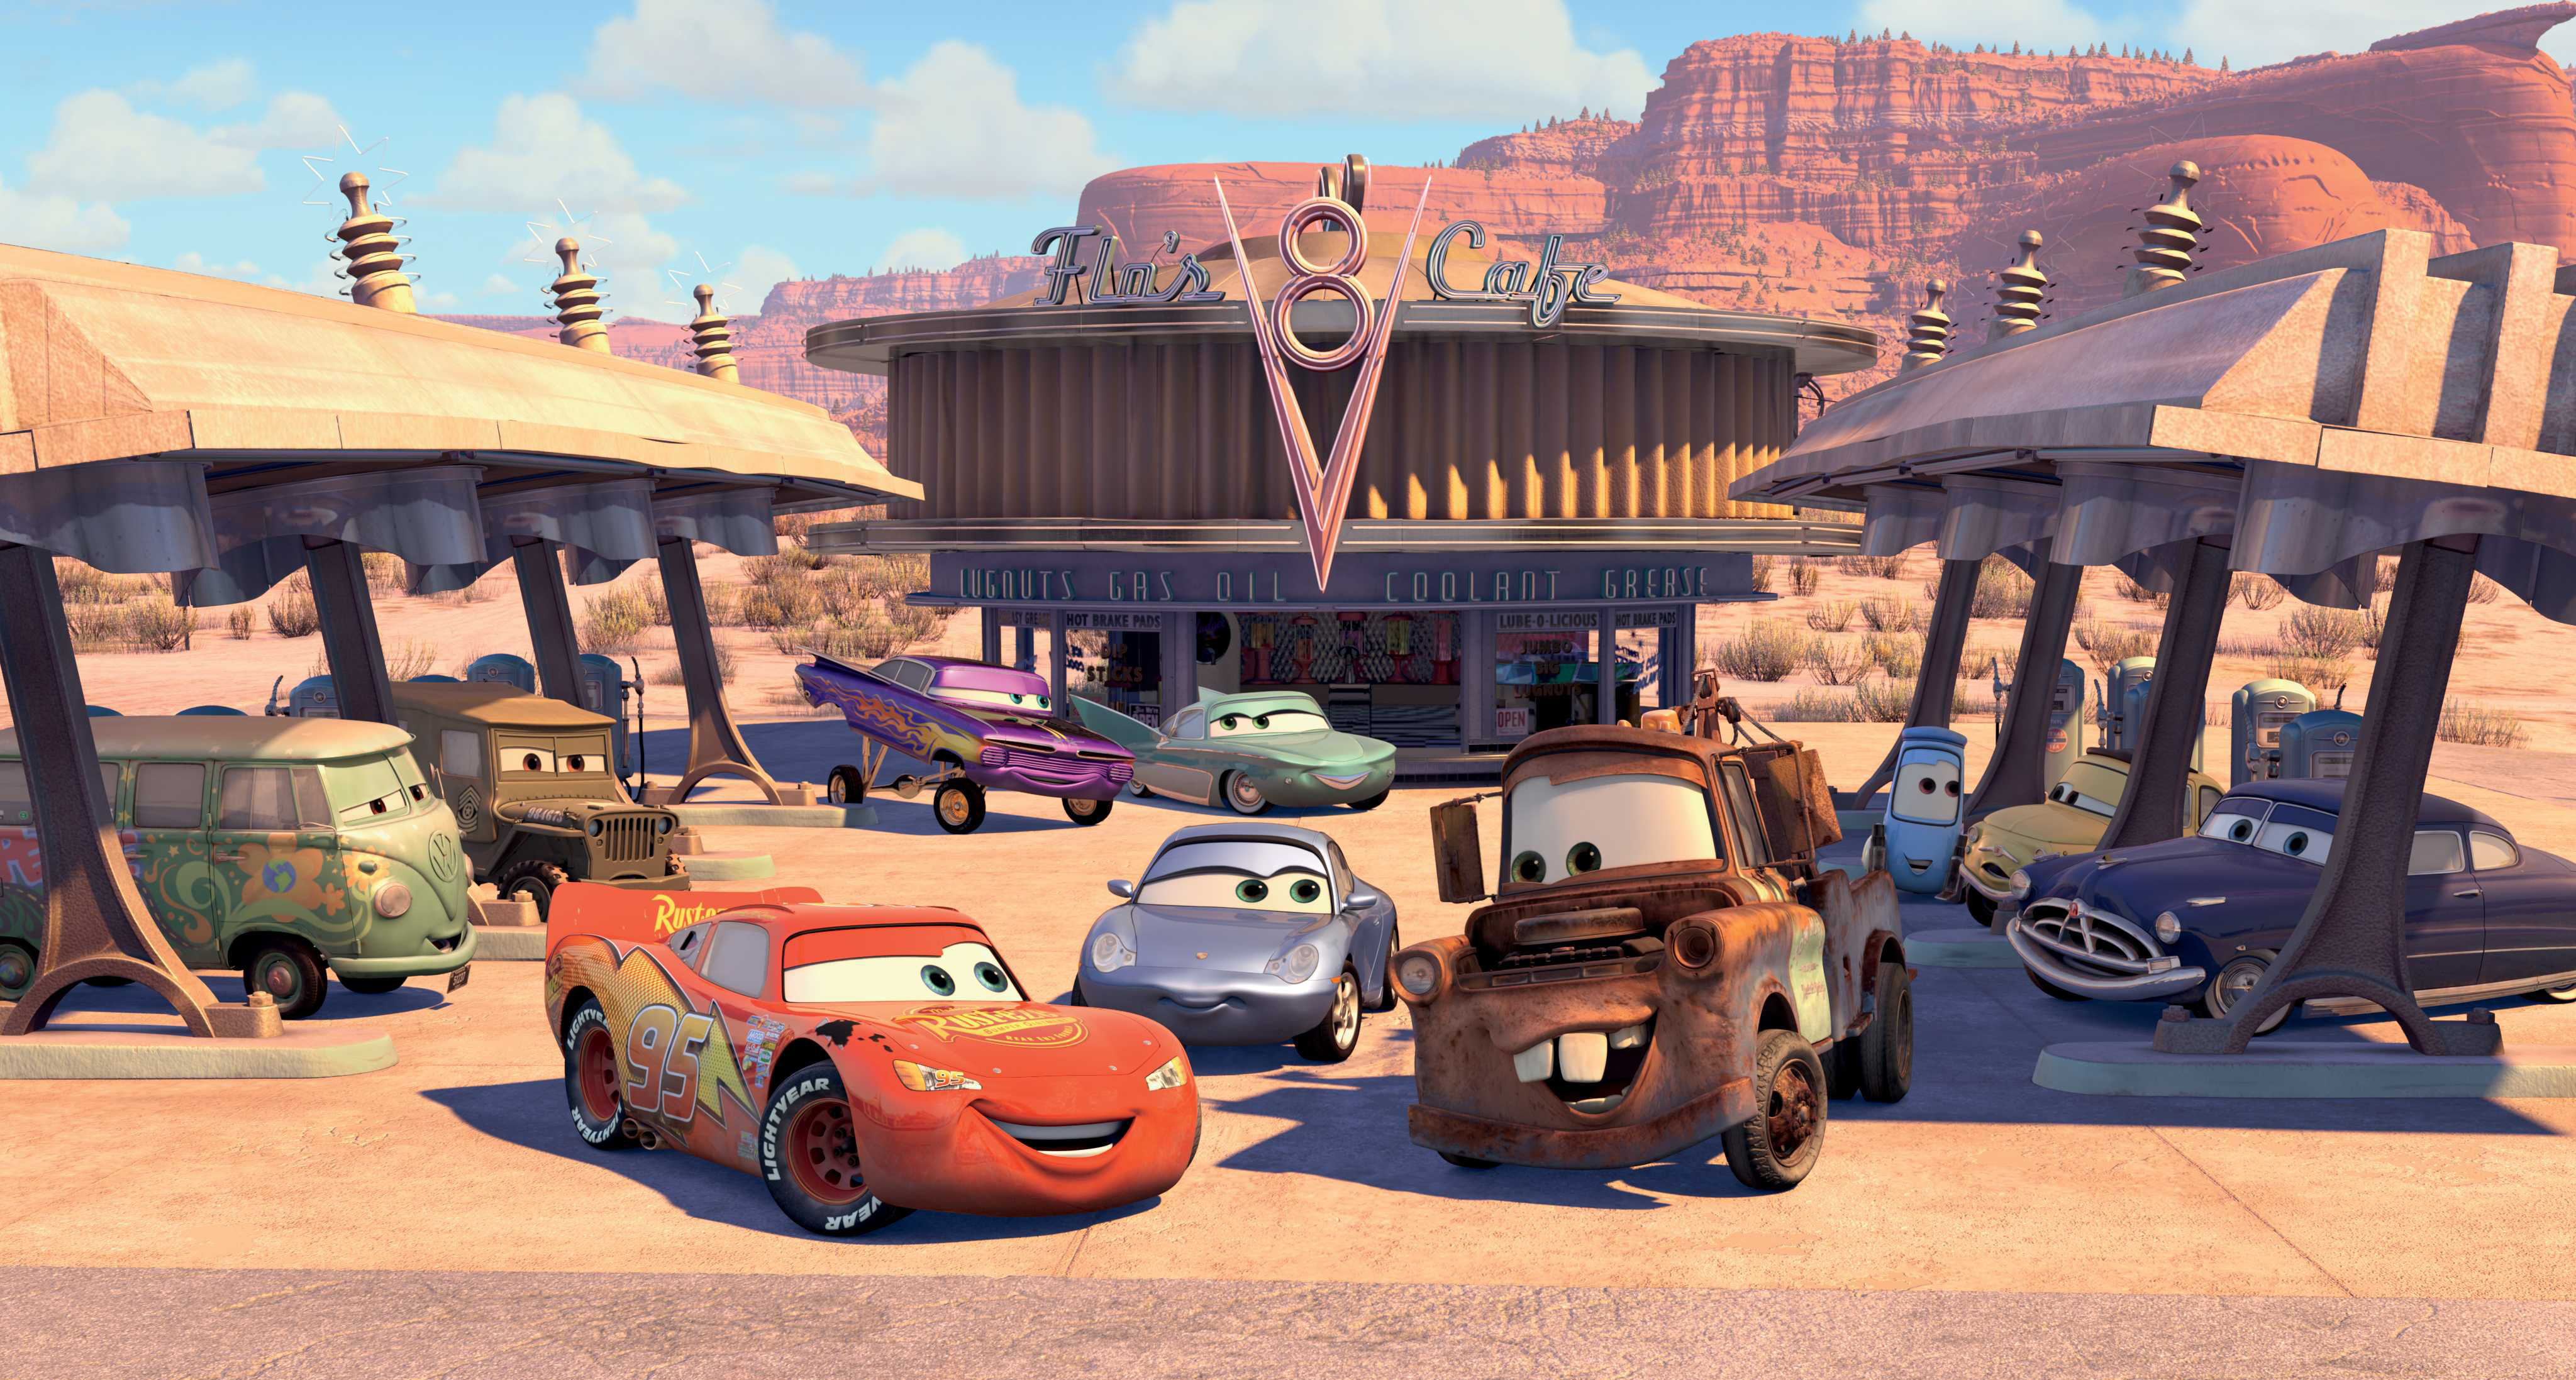 Which of the following Cars character is not featured in Paint the Night?